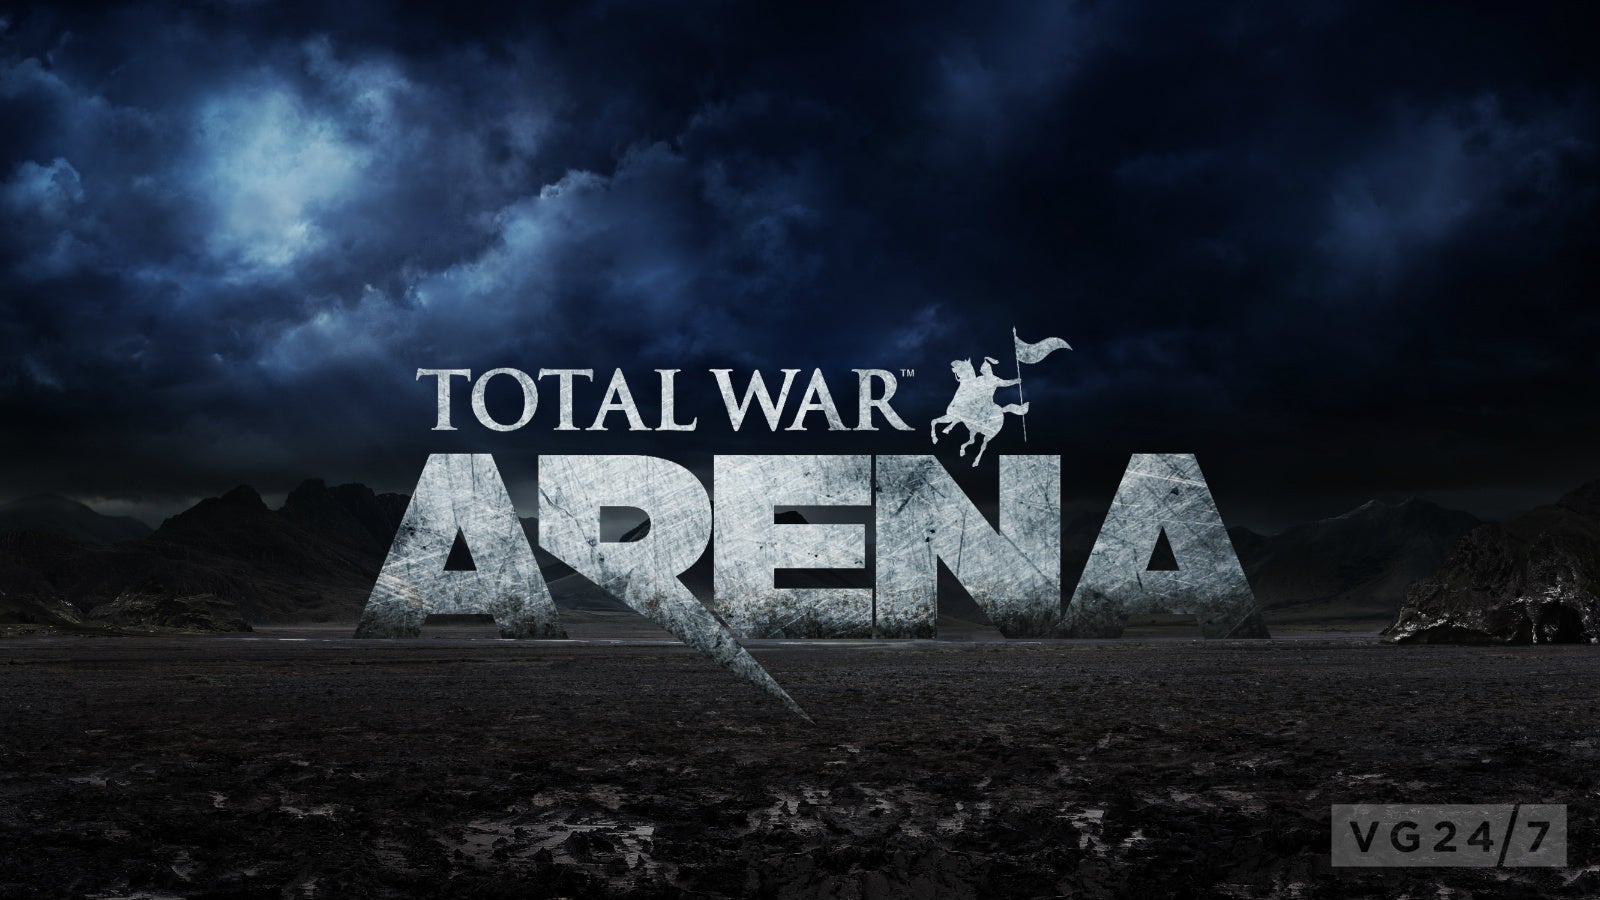 Image for First look at Total War: ARENA gameplay to be livestreamed later this month 